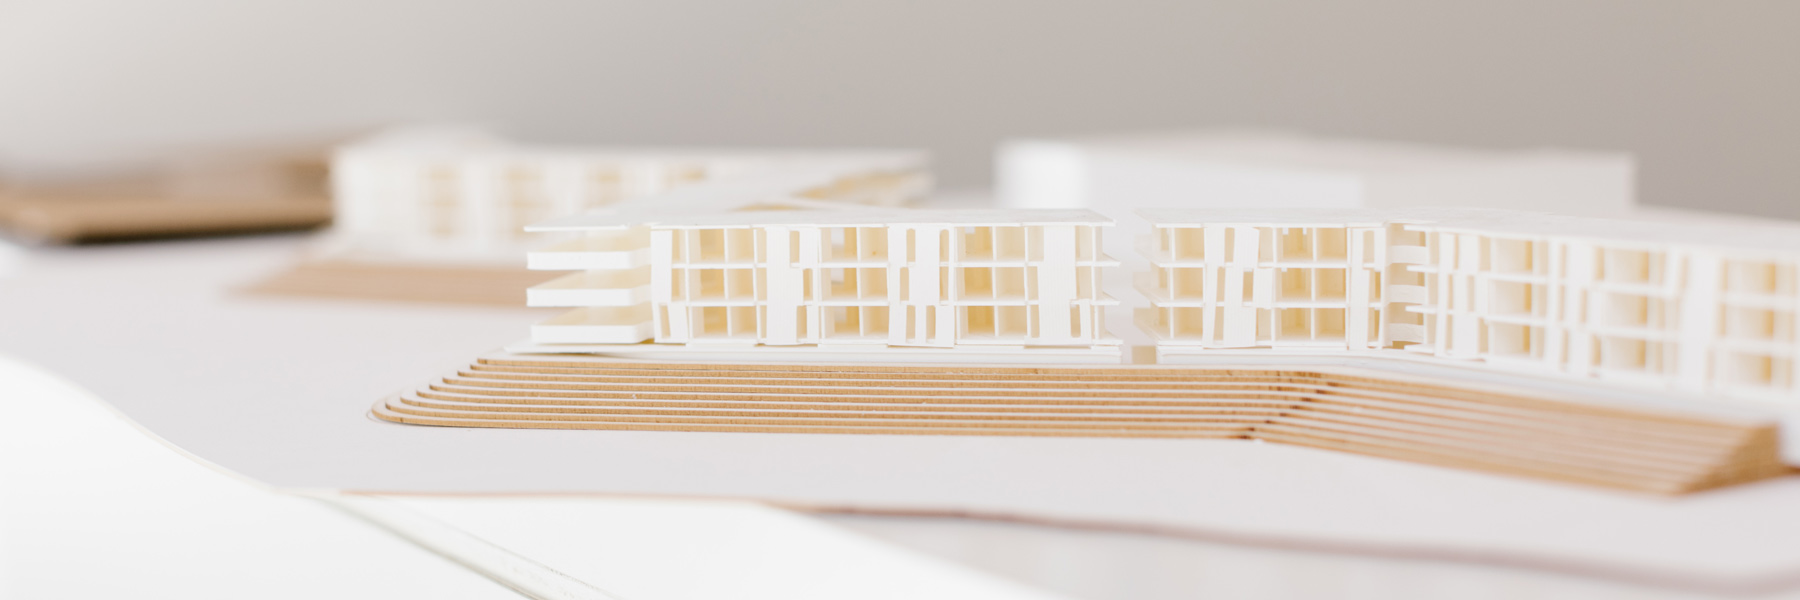 architectural model of a building